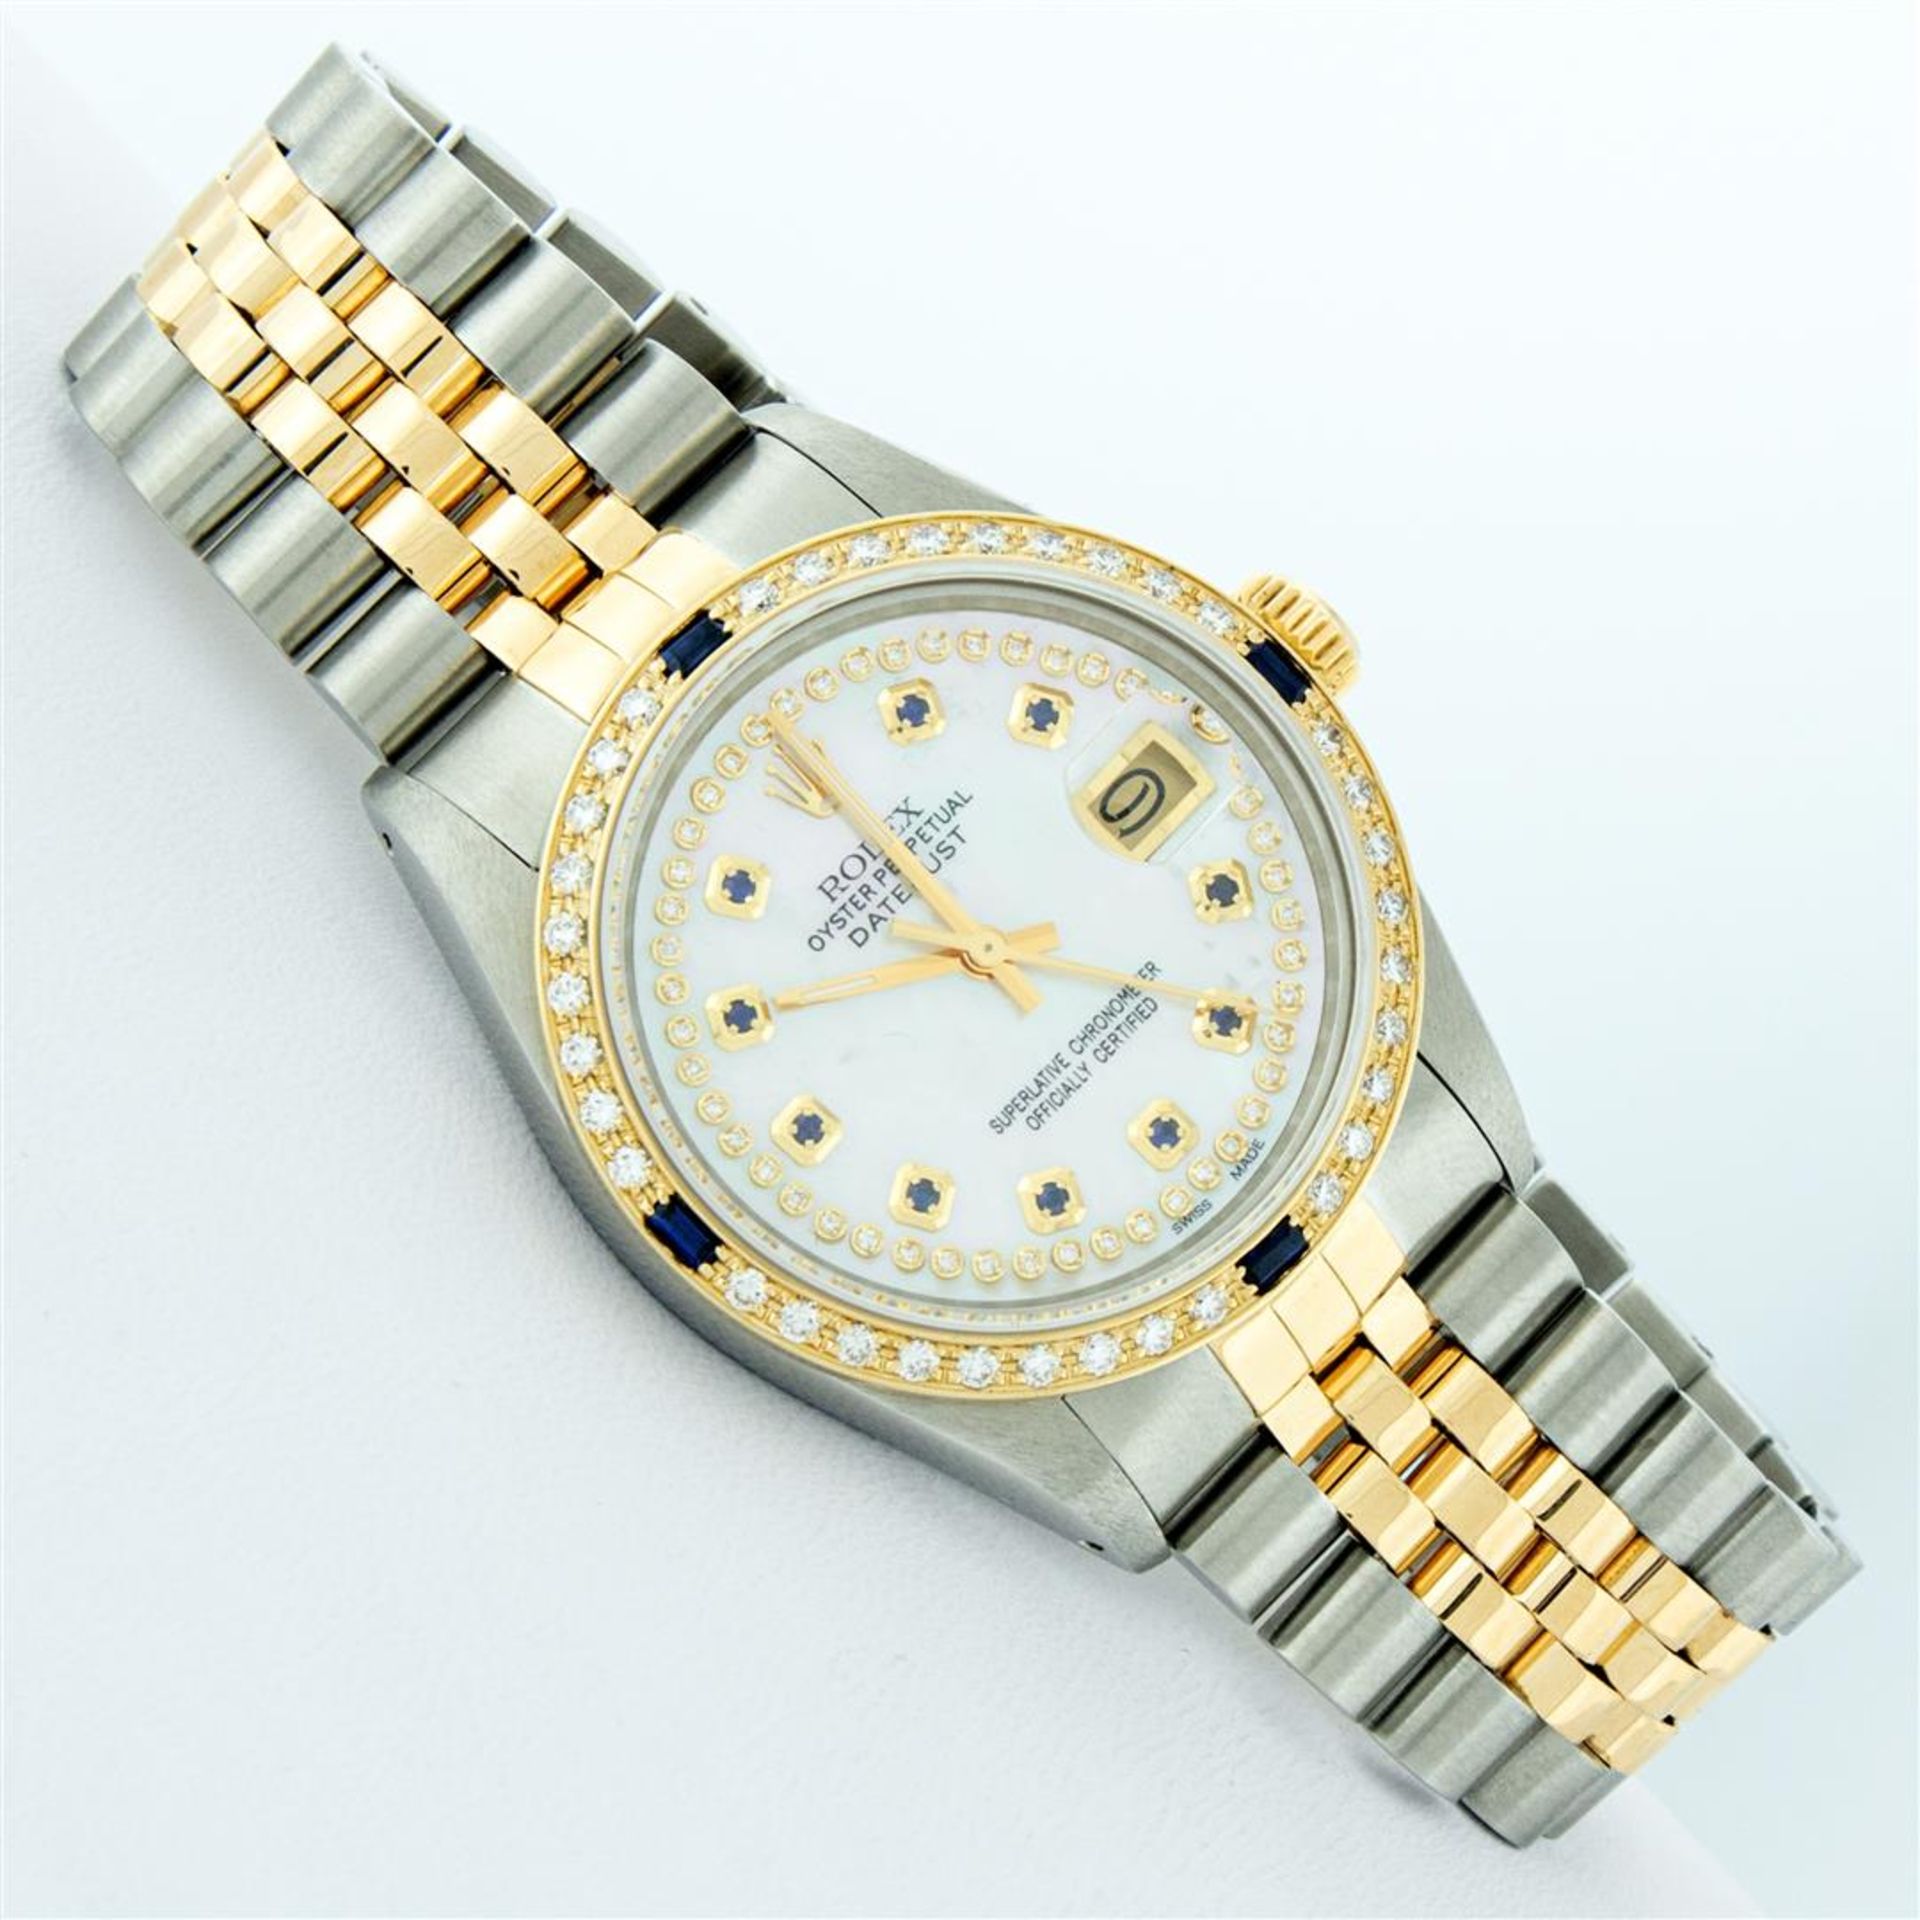 Rolex Mens 2 Tone Mother Of Pearl Diamond & Sapphire Datejust Wristwatch - Image 3 of 9